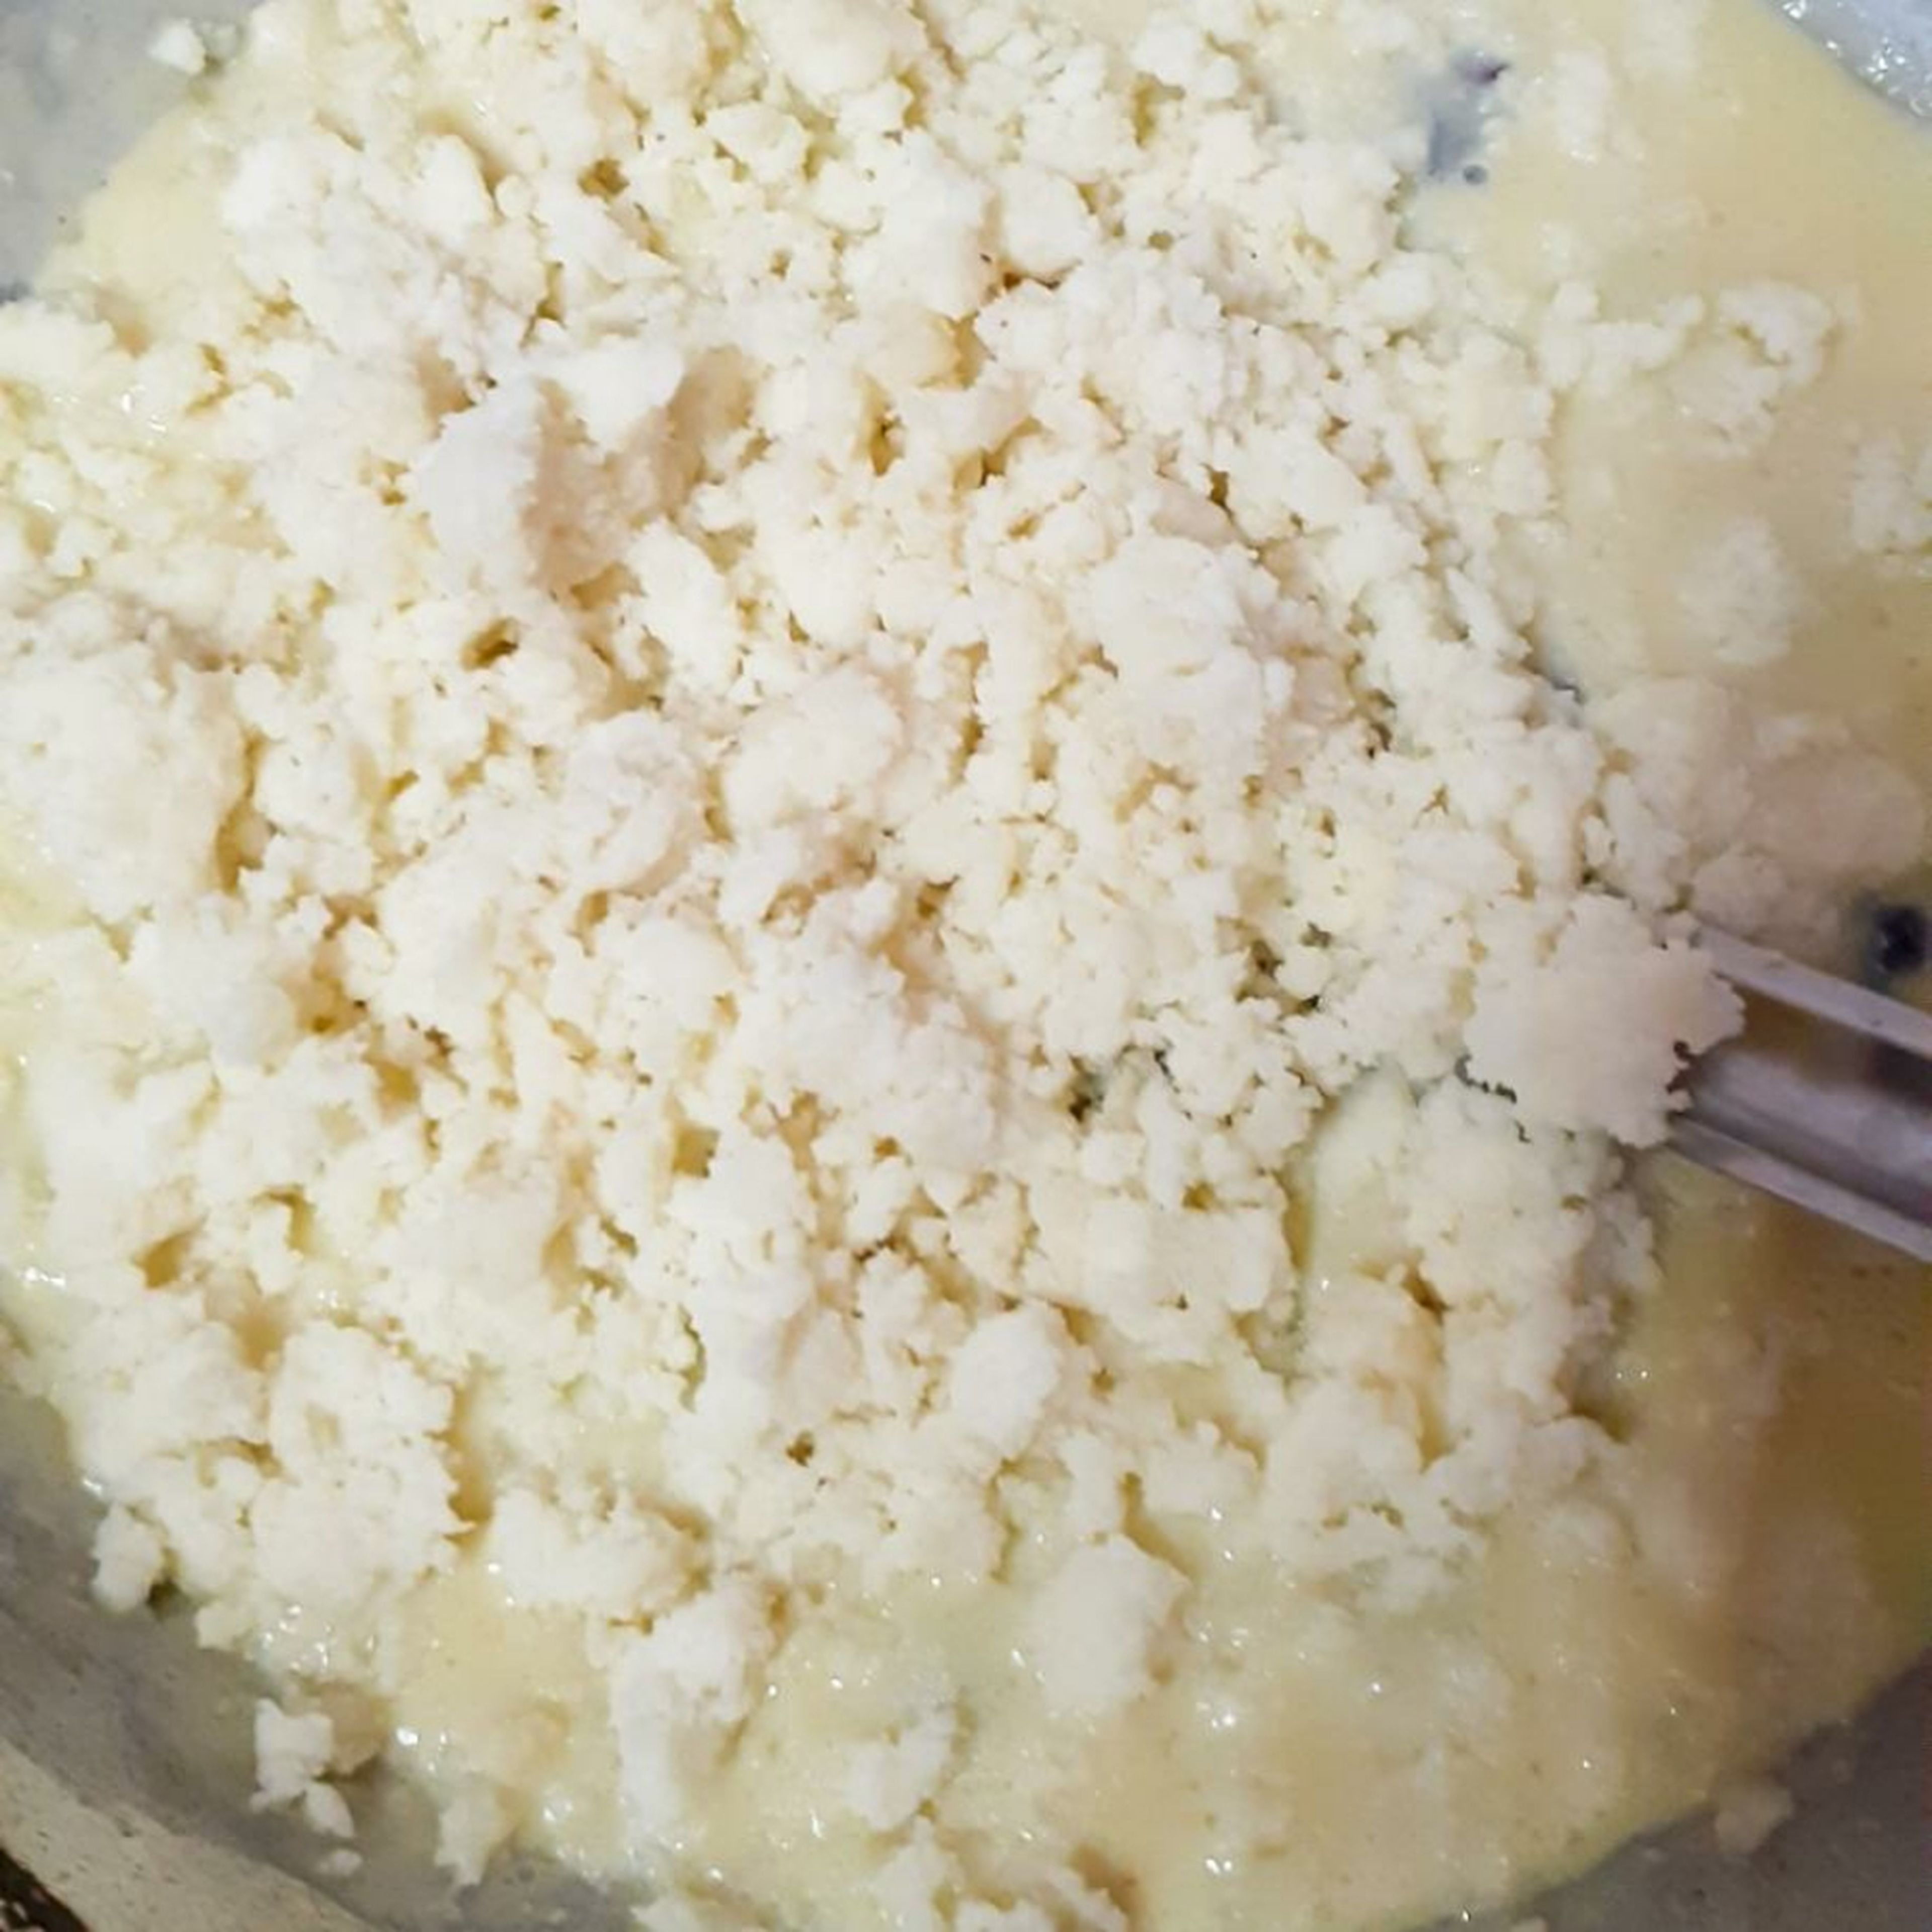 Add in the grated or crumbled paneer or mawa/khoya and stir continuously.